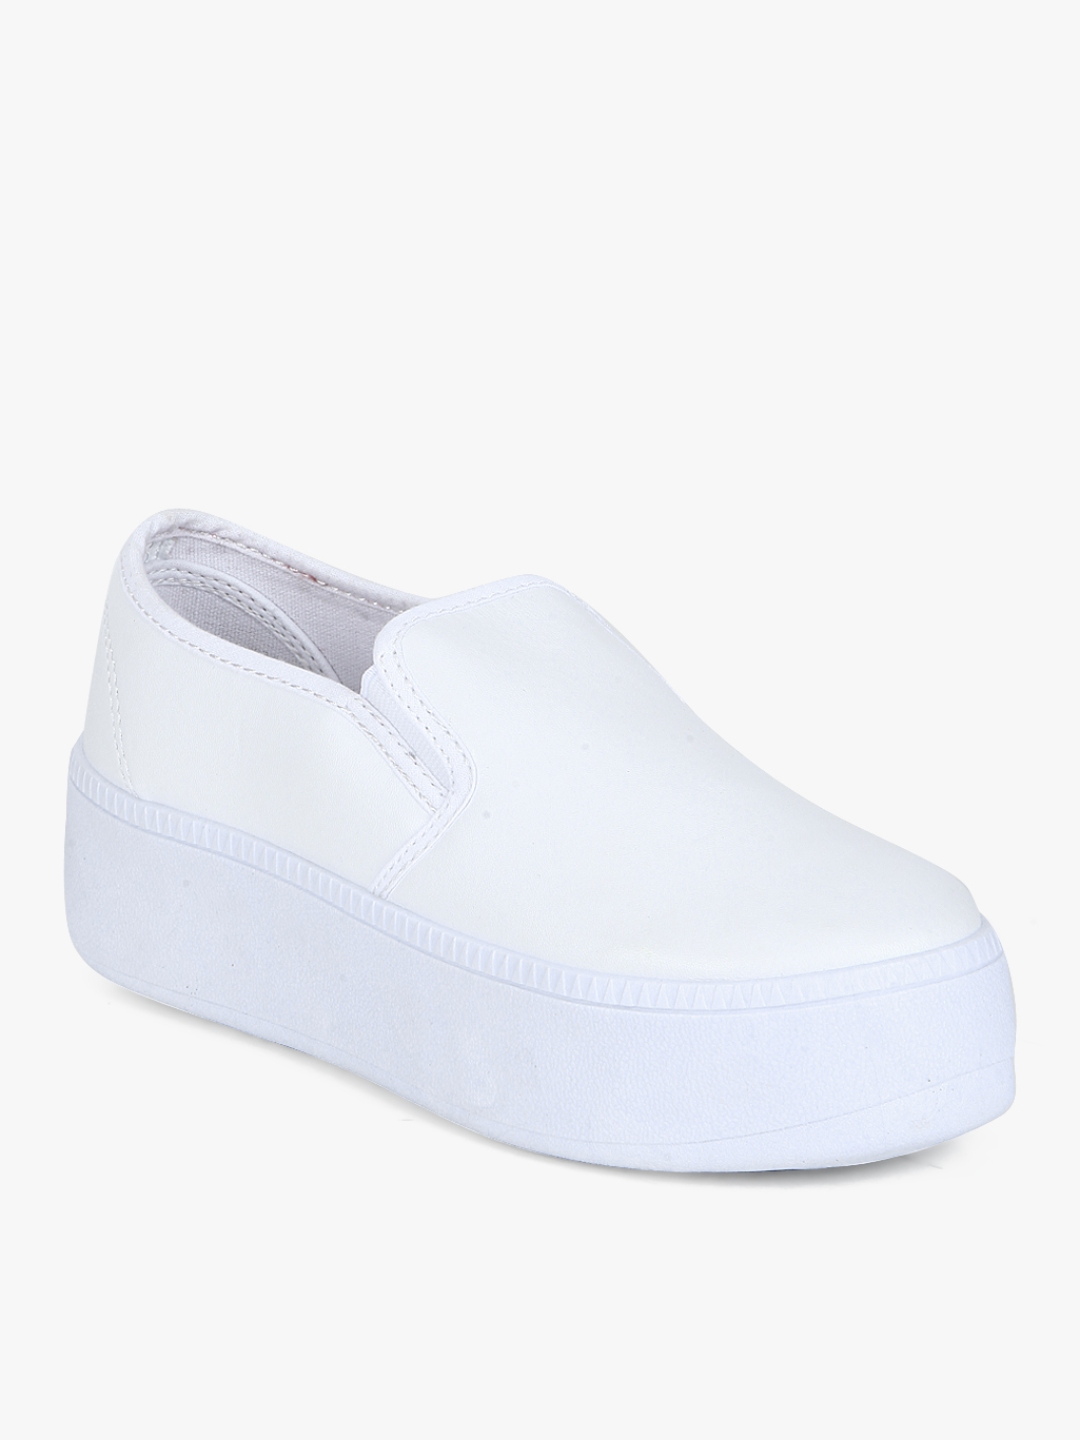 Buy White Casual Sneakers - Casual Shoes for Women 7685590 | Myntra